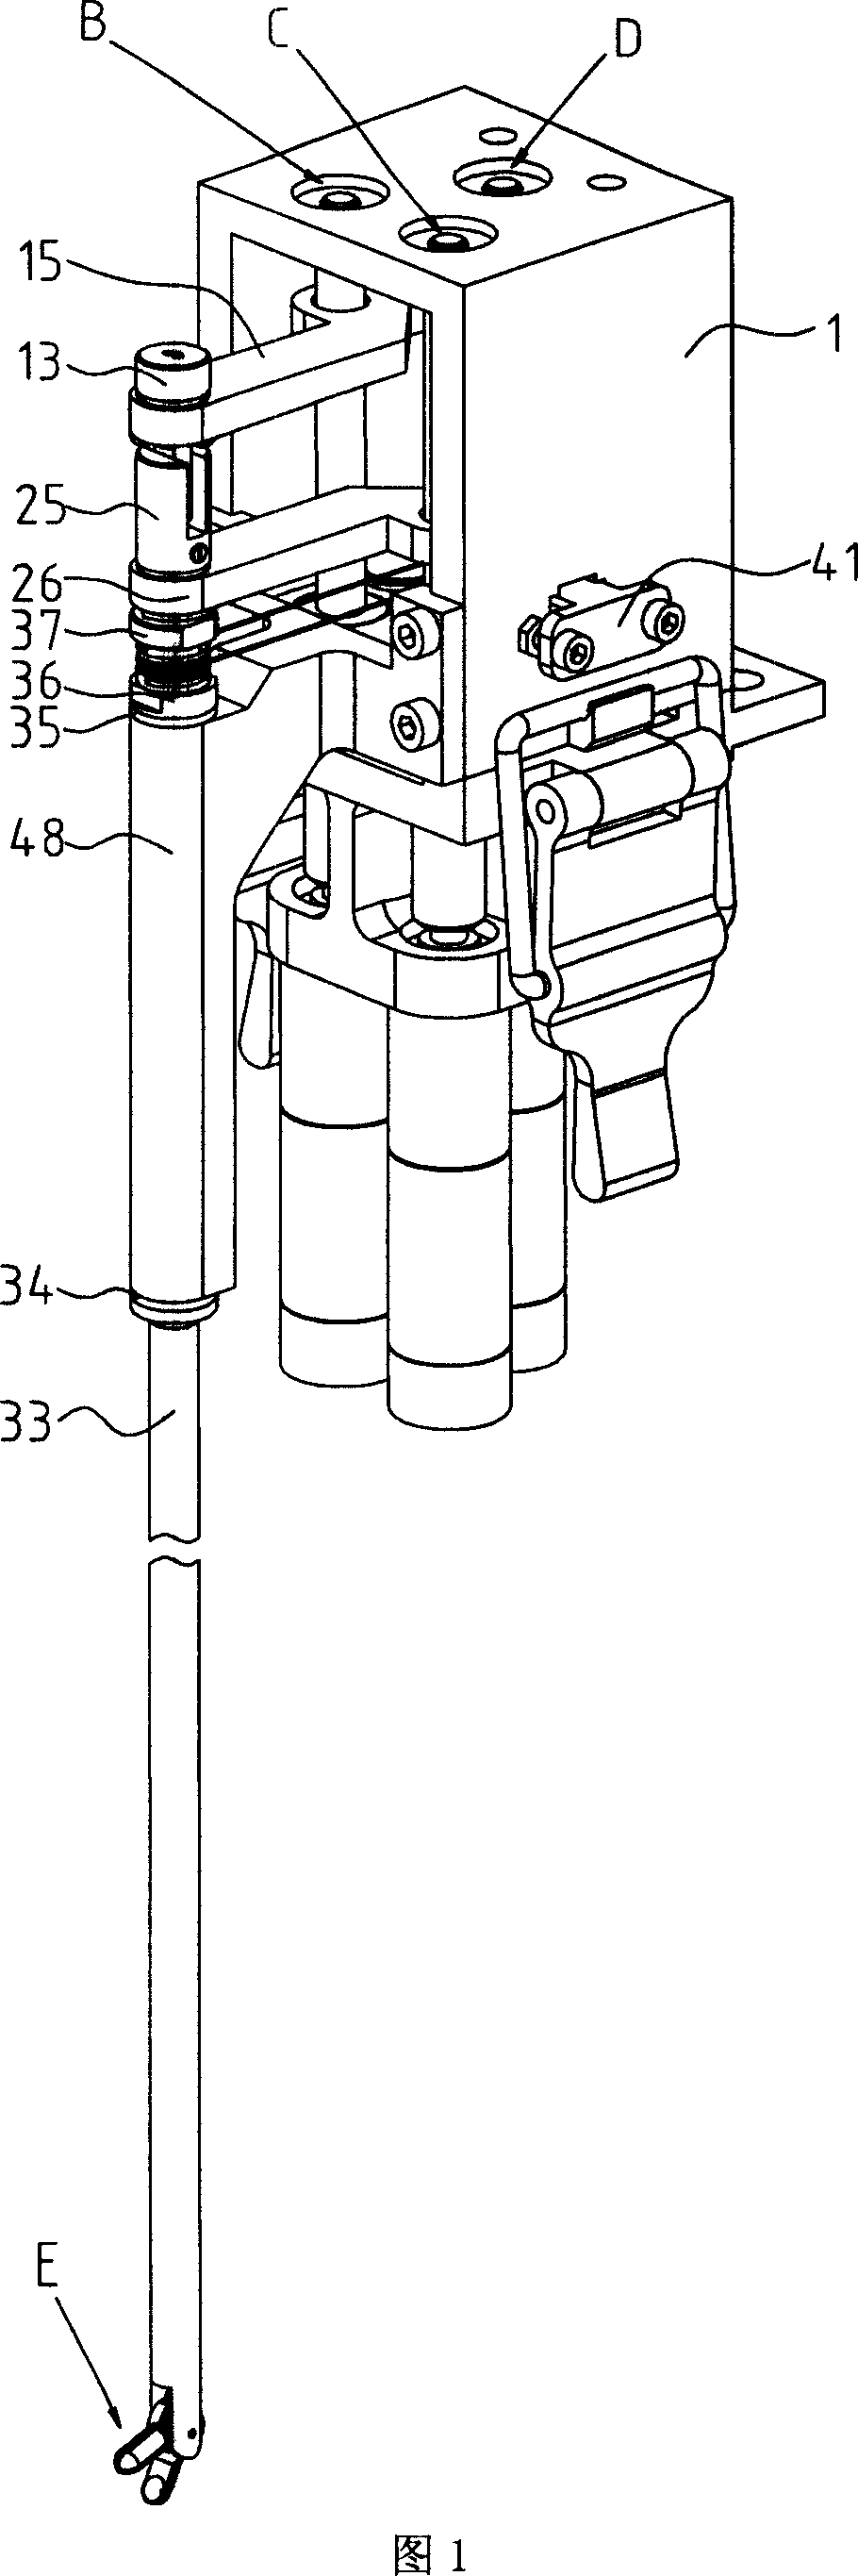 Multi-freedom micro-mechanical arm for minimally invasive operation